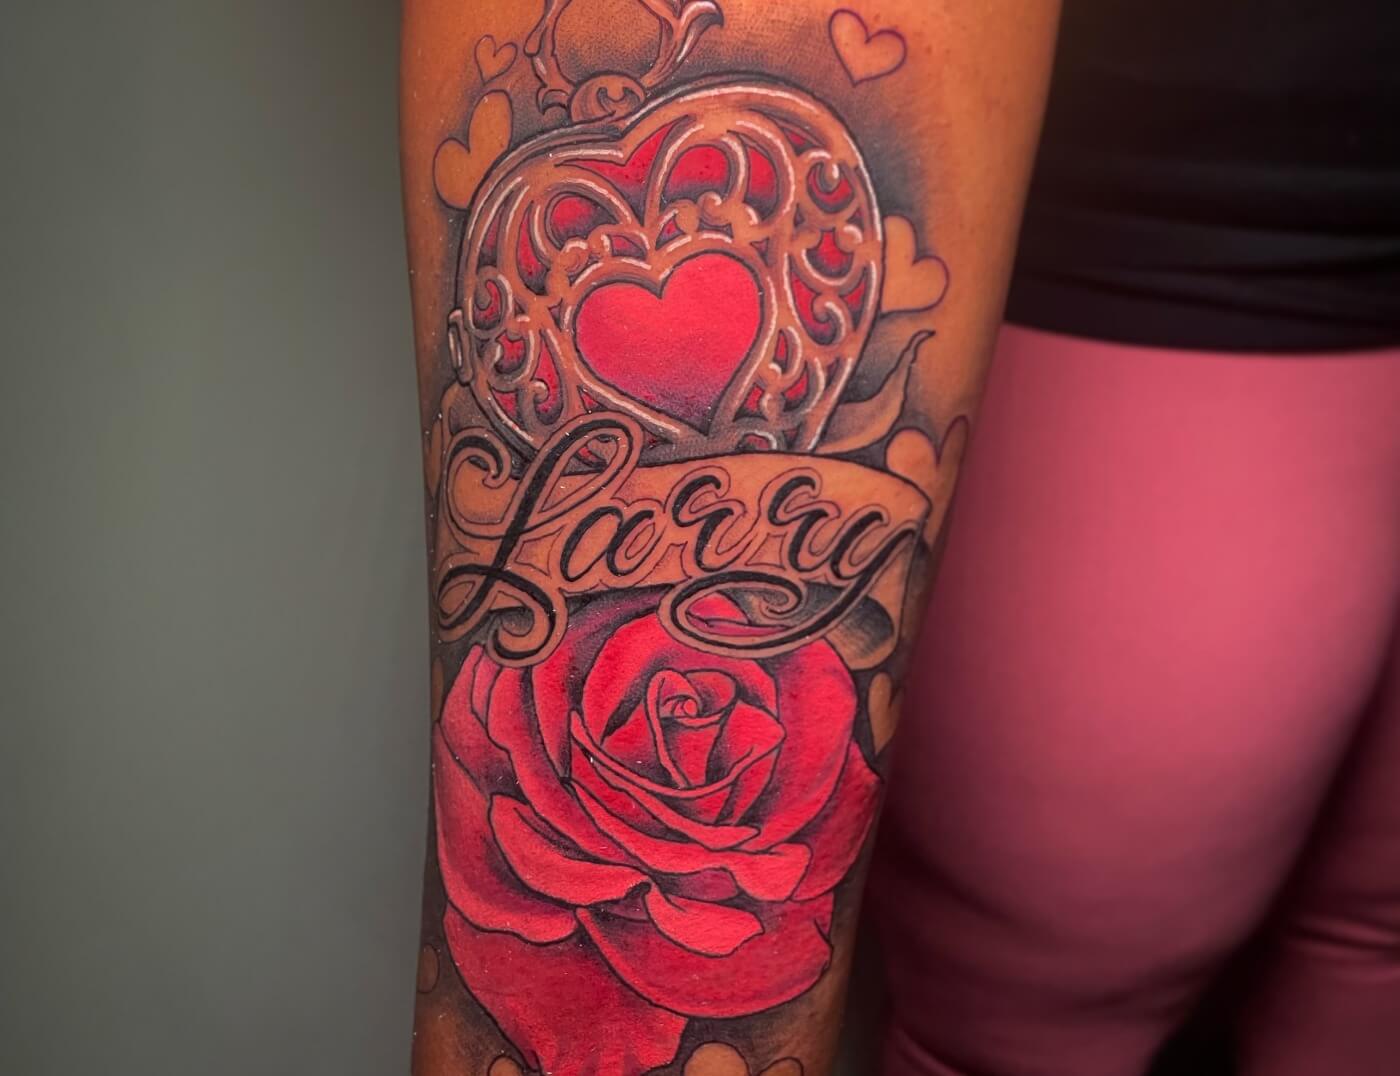 Rose Tattoos - Symbolism, Designs and Placement